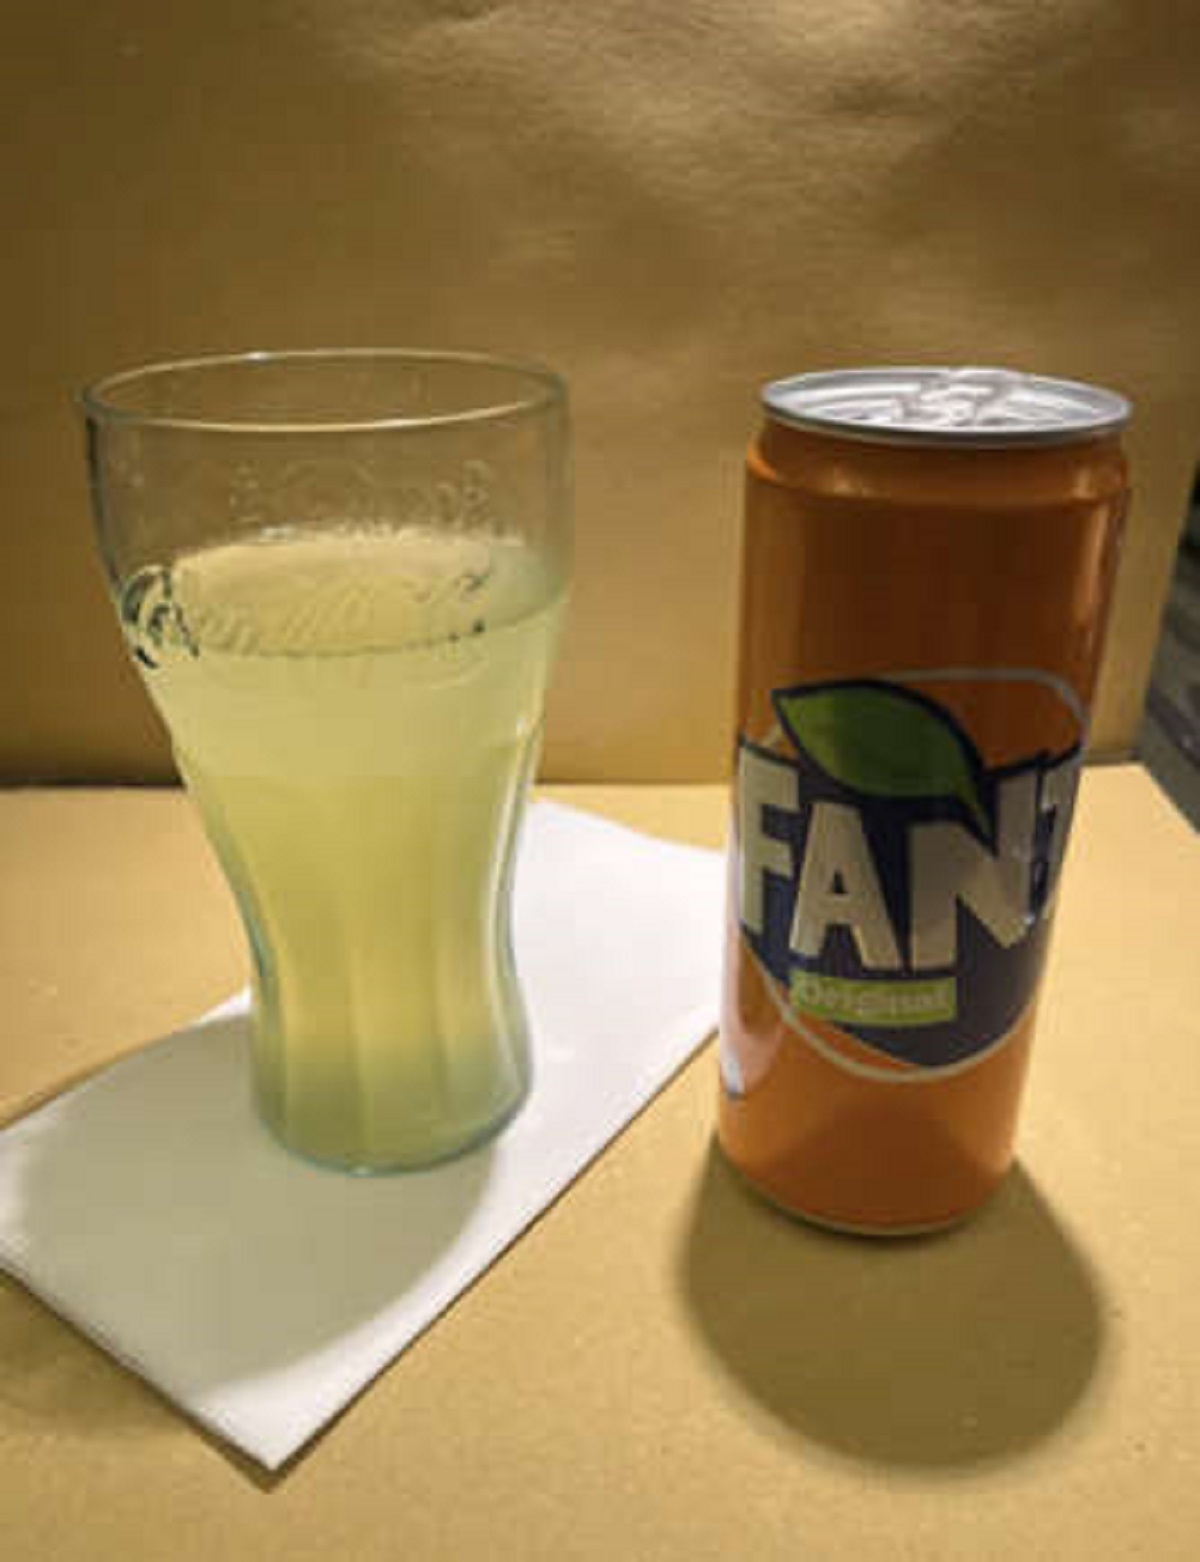 You wanted Fanta in Italy? Fanta in Italy has no dyes or artificial flavors.